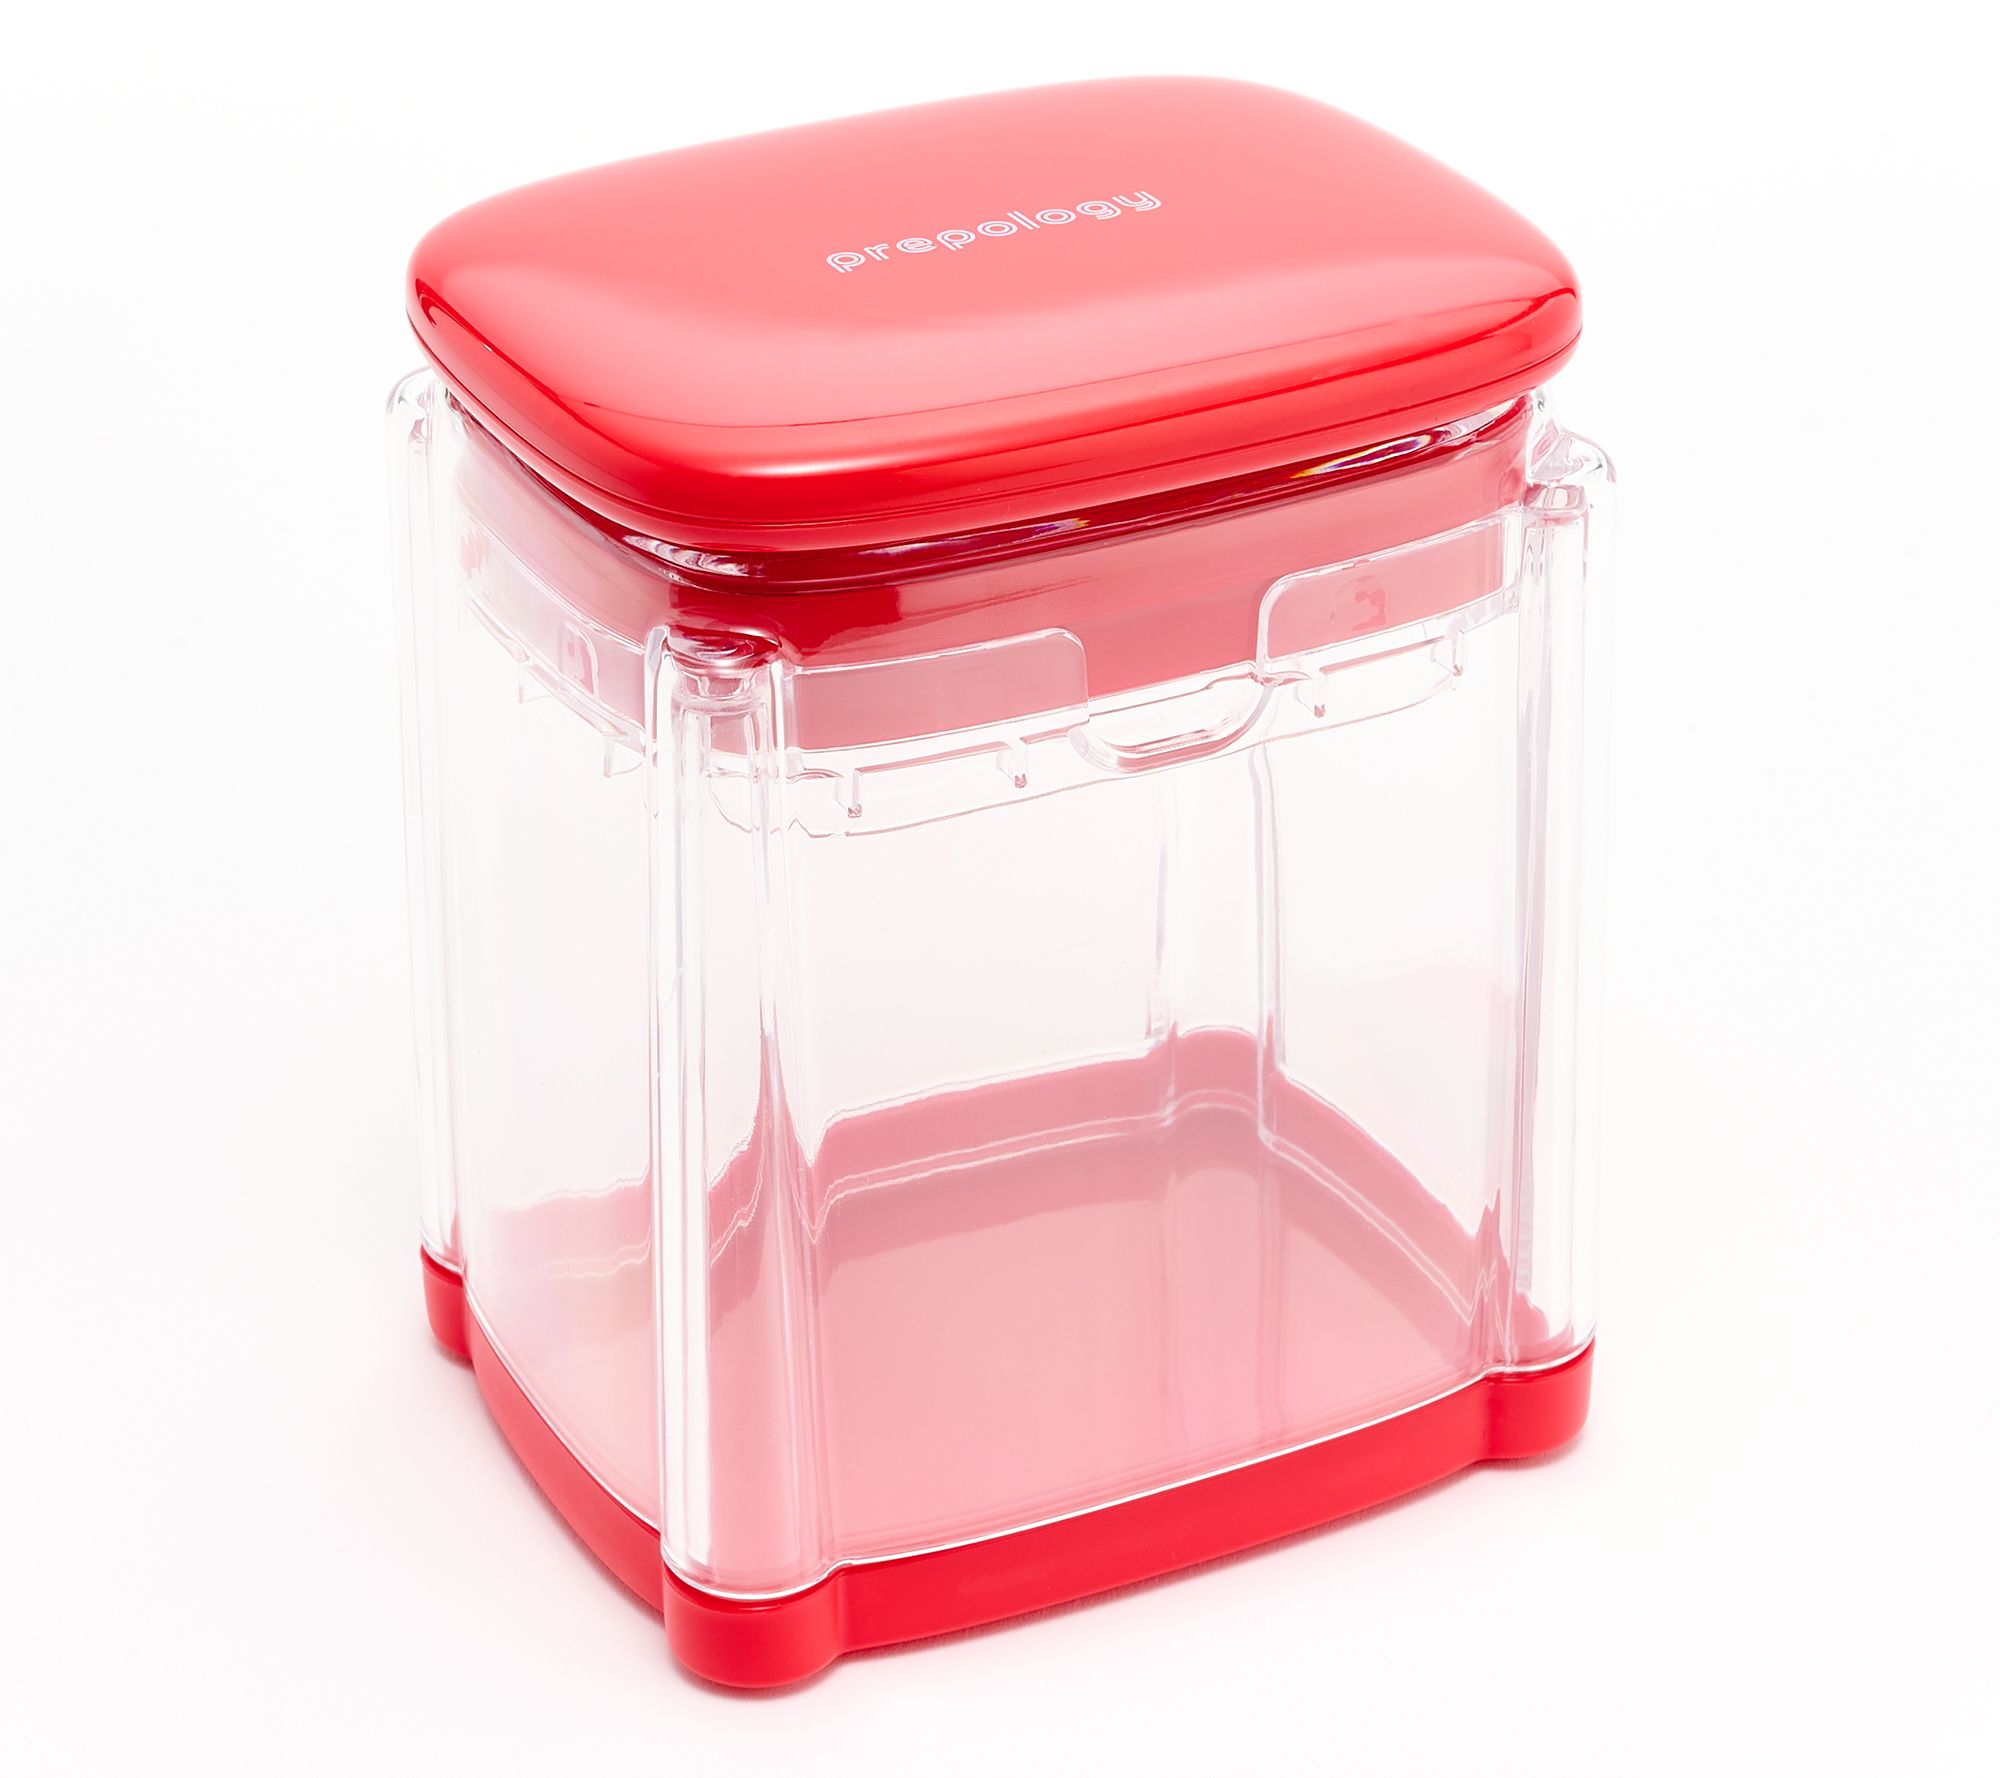 As Is Prepology 4-Cup Press Chopper withStorage Lid - Yahoo Shopping